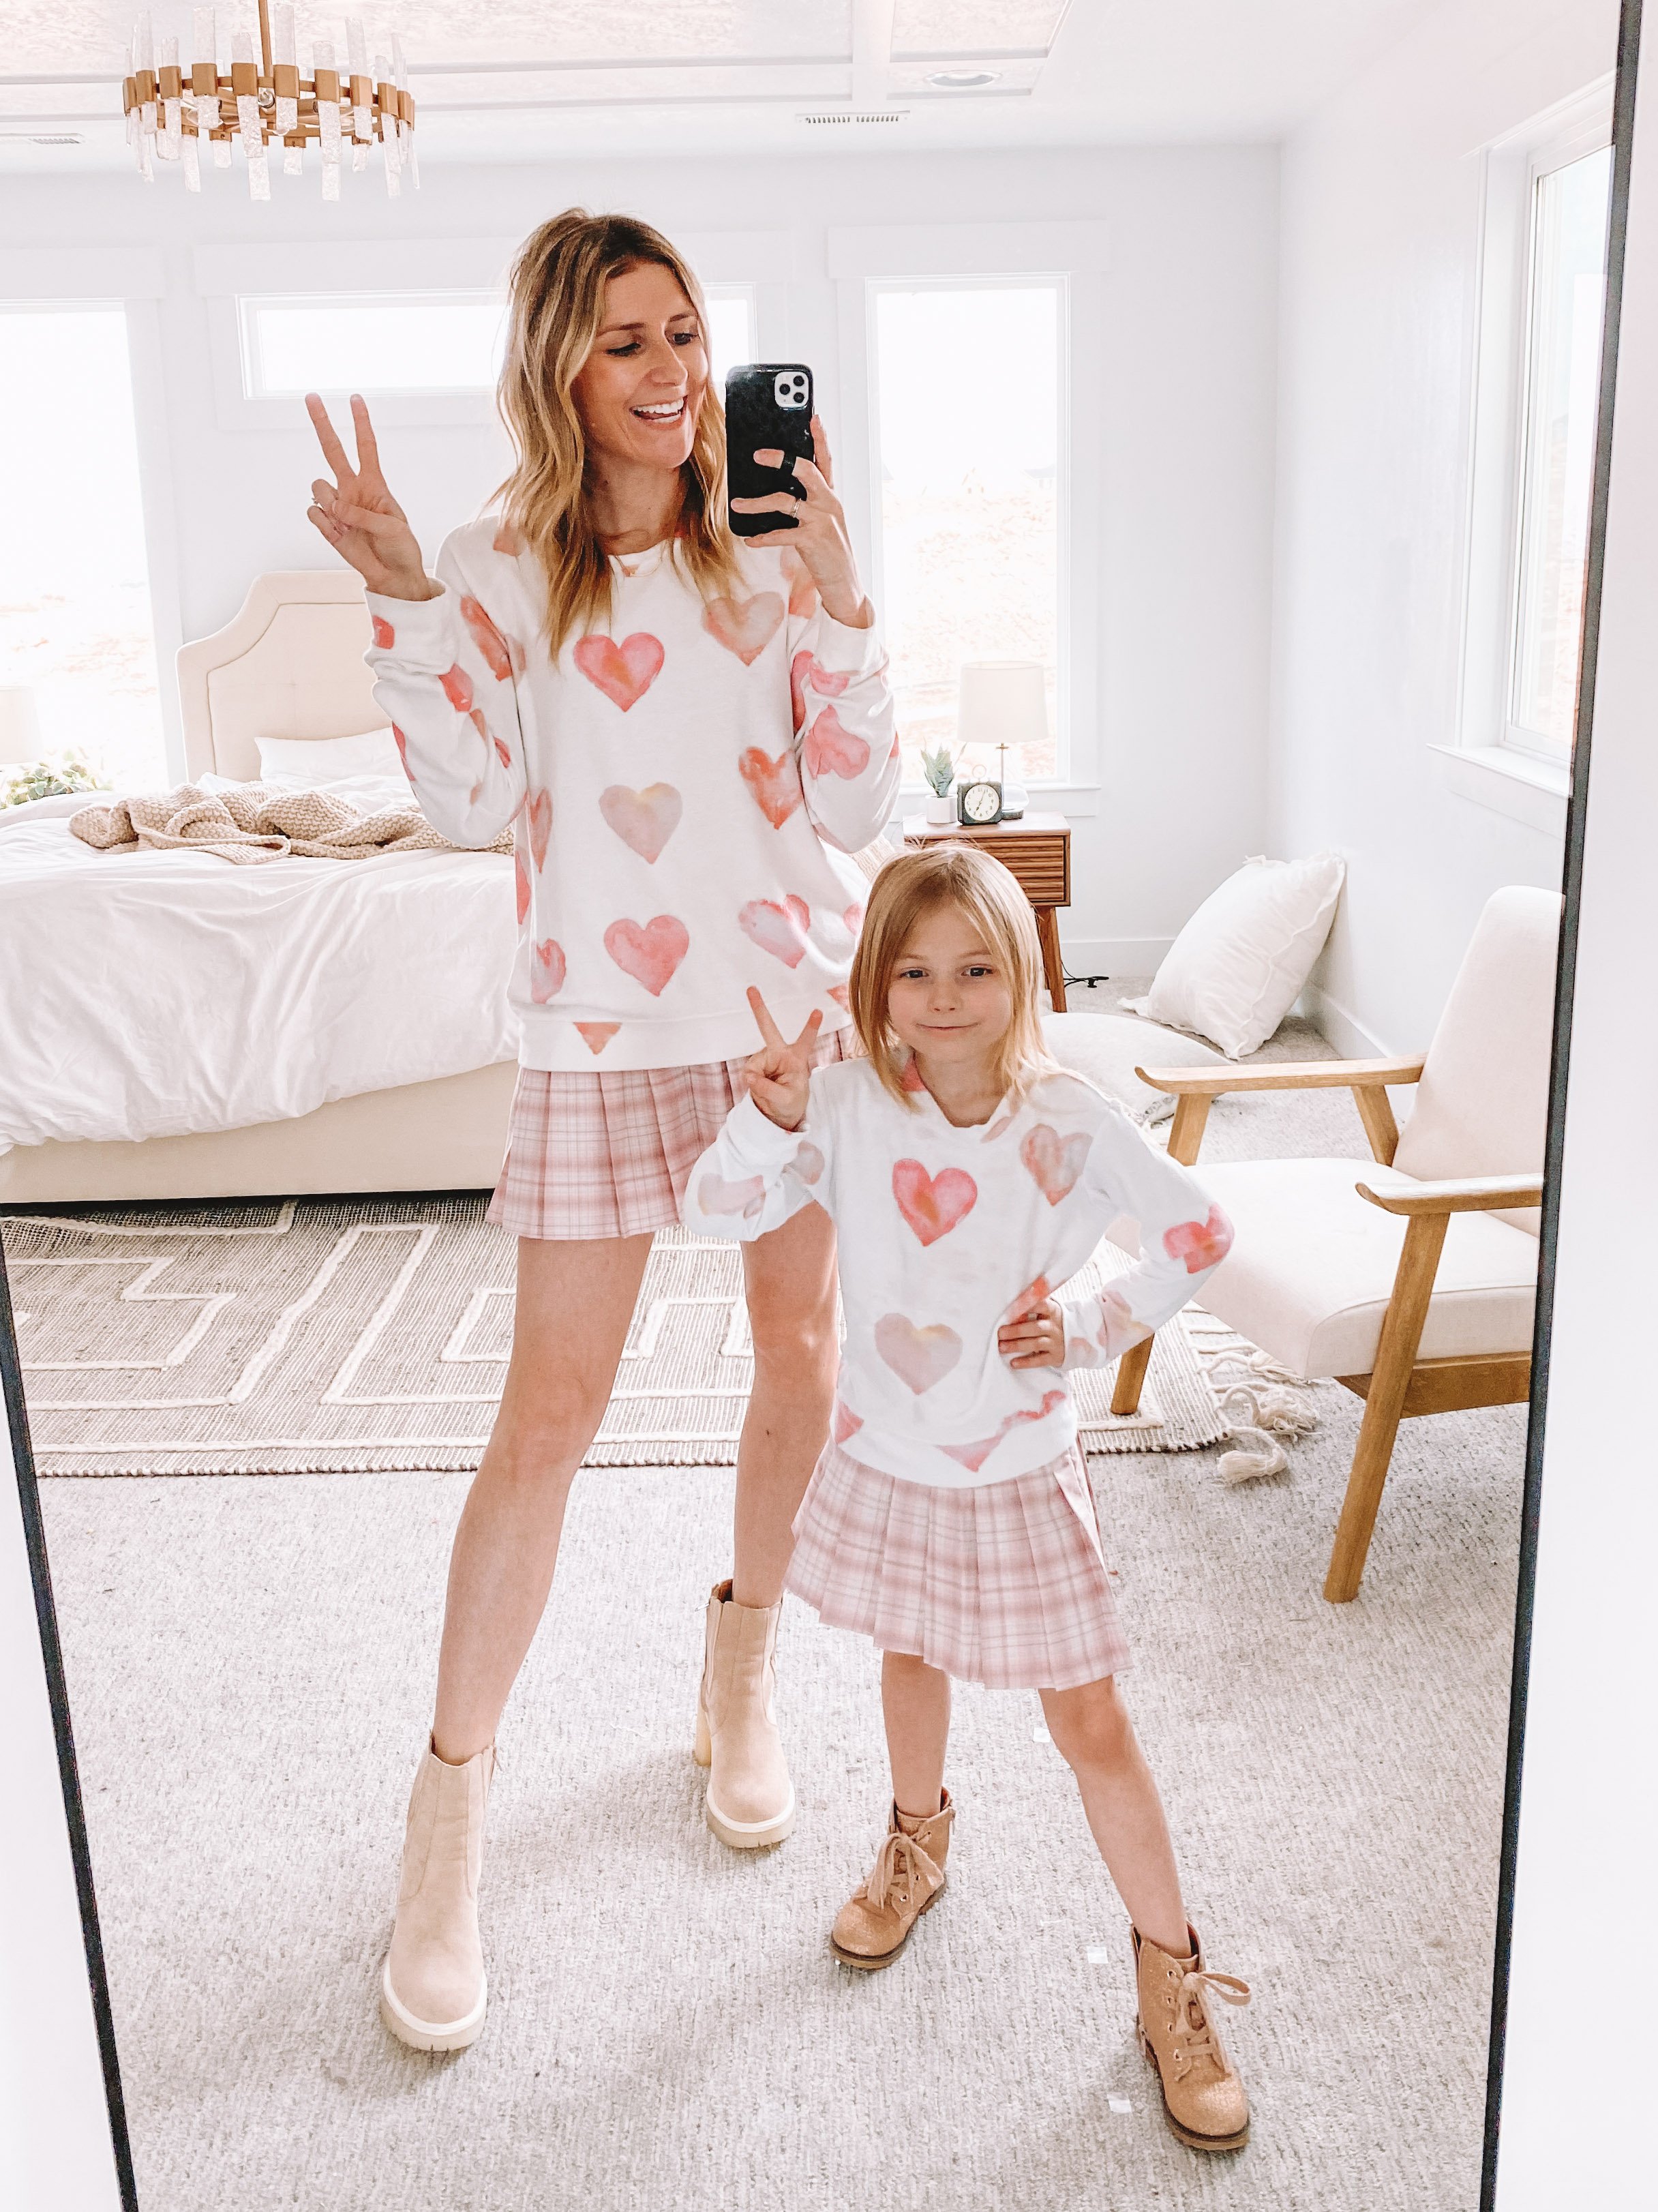 Miami Fashion Blogger - Mommy & Me Outfits - Page 5 of 9 - Fashion